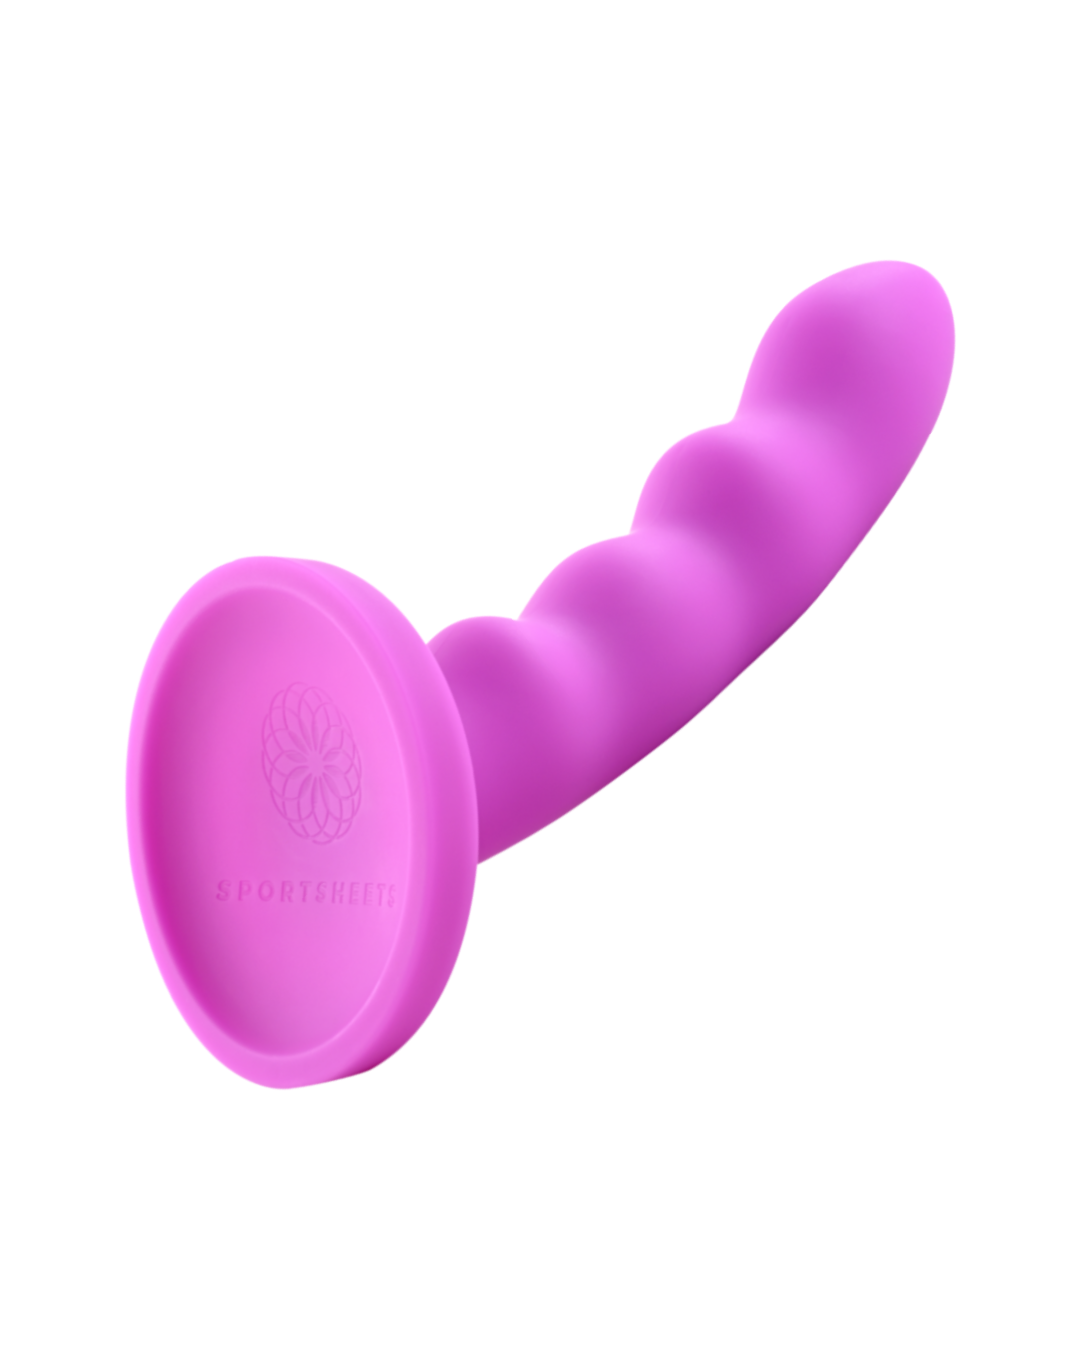 Sportsheets Nautia 8" Silicone G-Spot & Prostate Dildo - Pink close up of the powerful suction cup